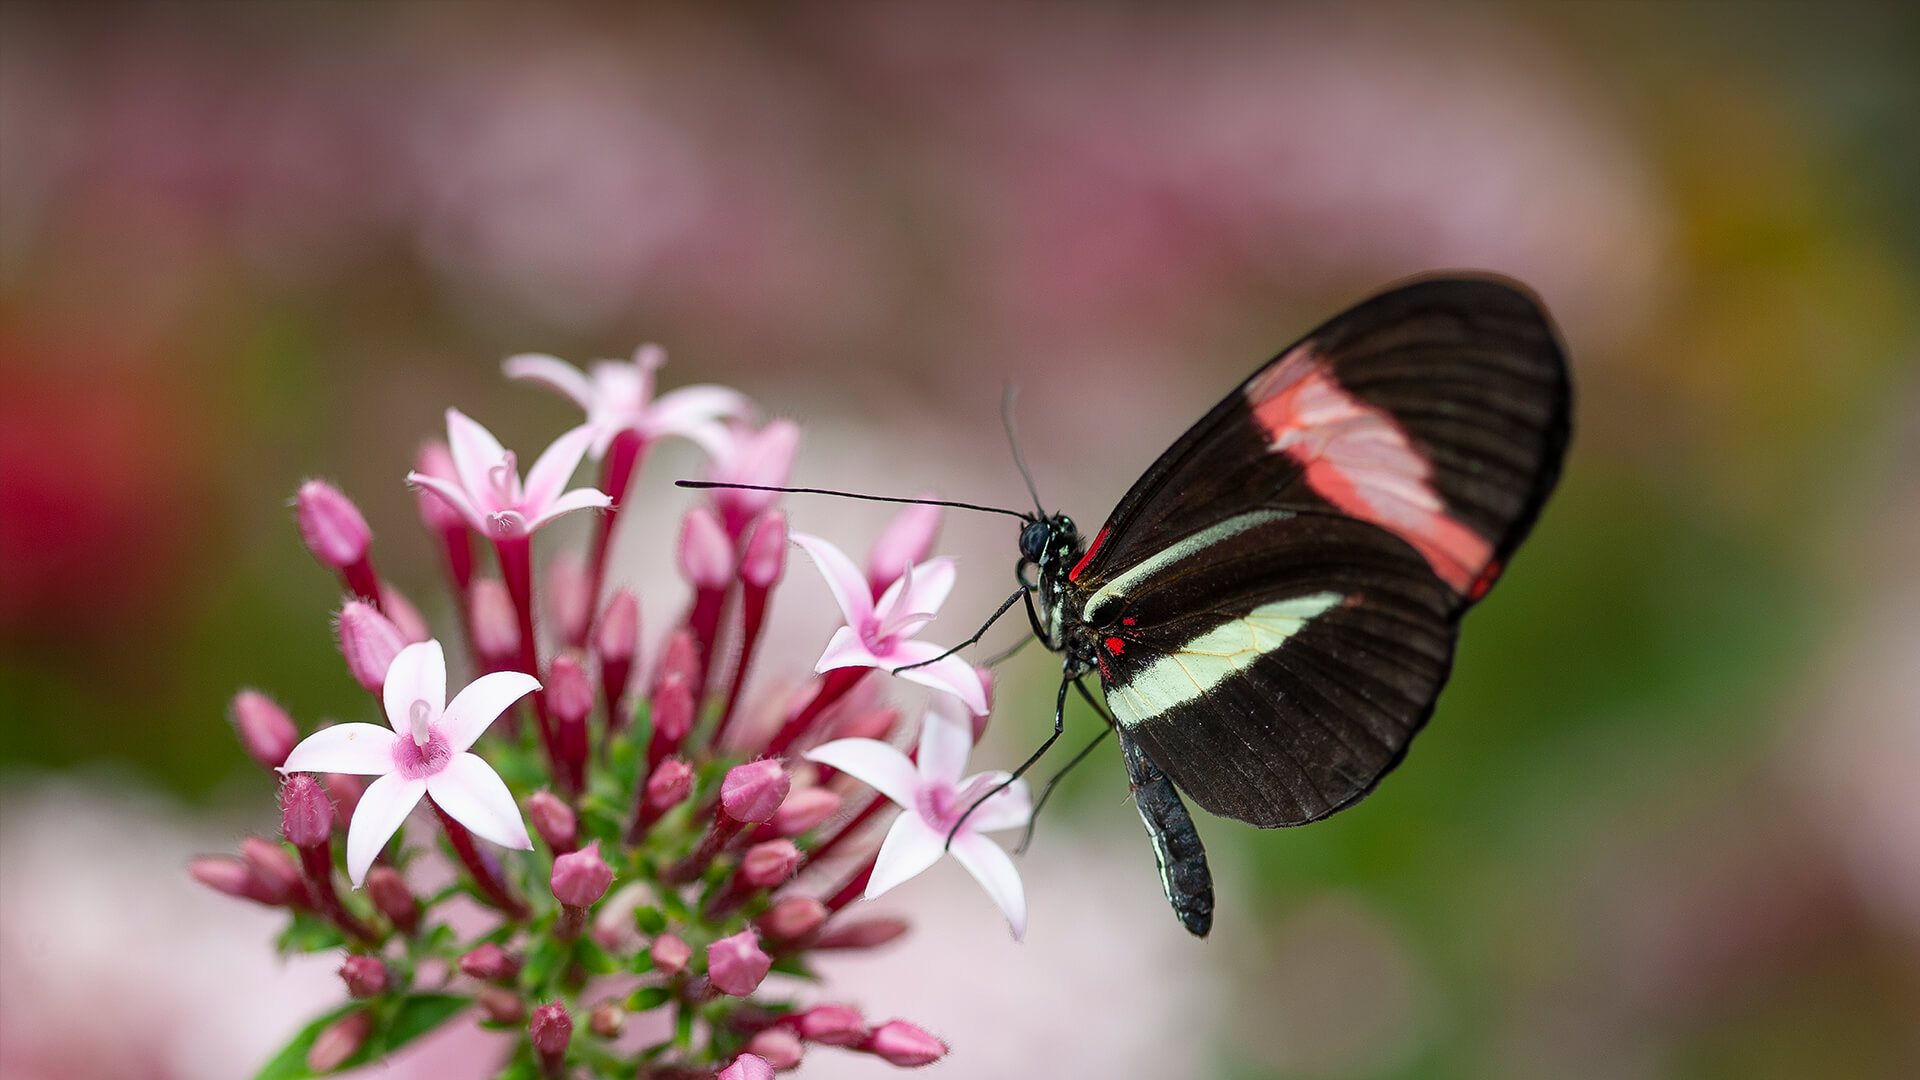 Butterfly sitting on a cluster of pink pentas flowers.